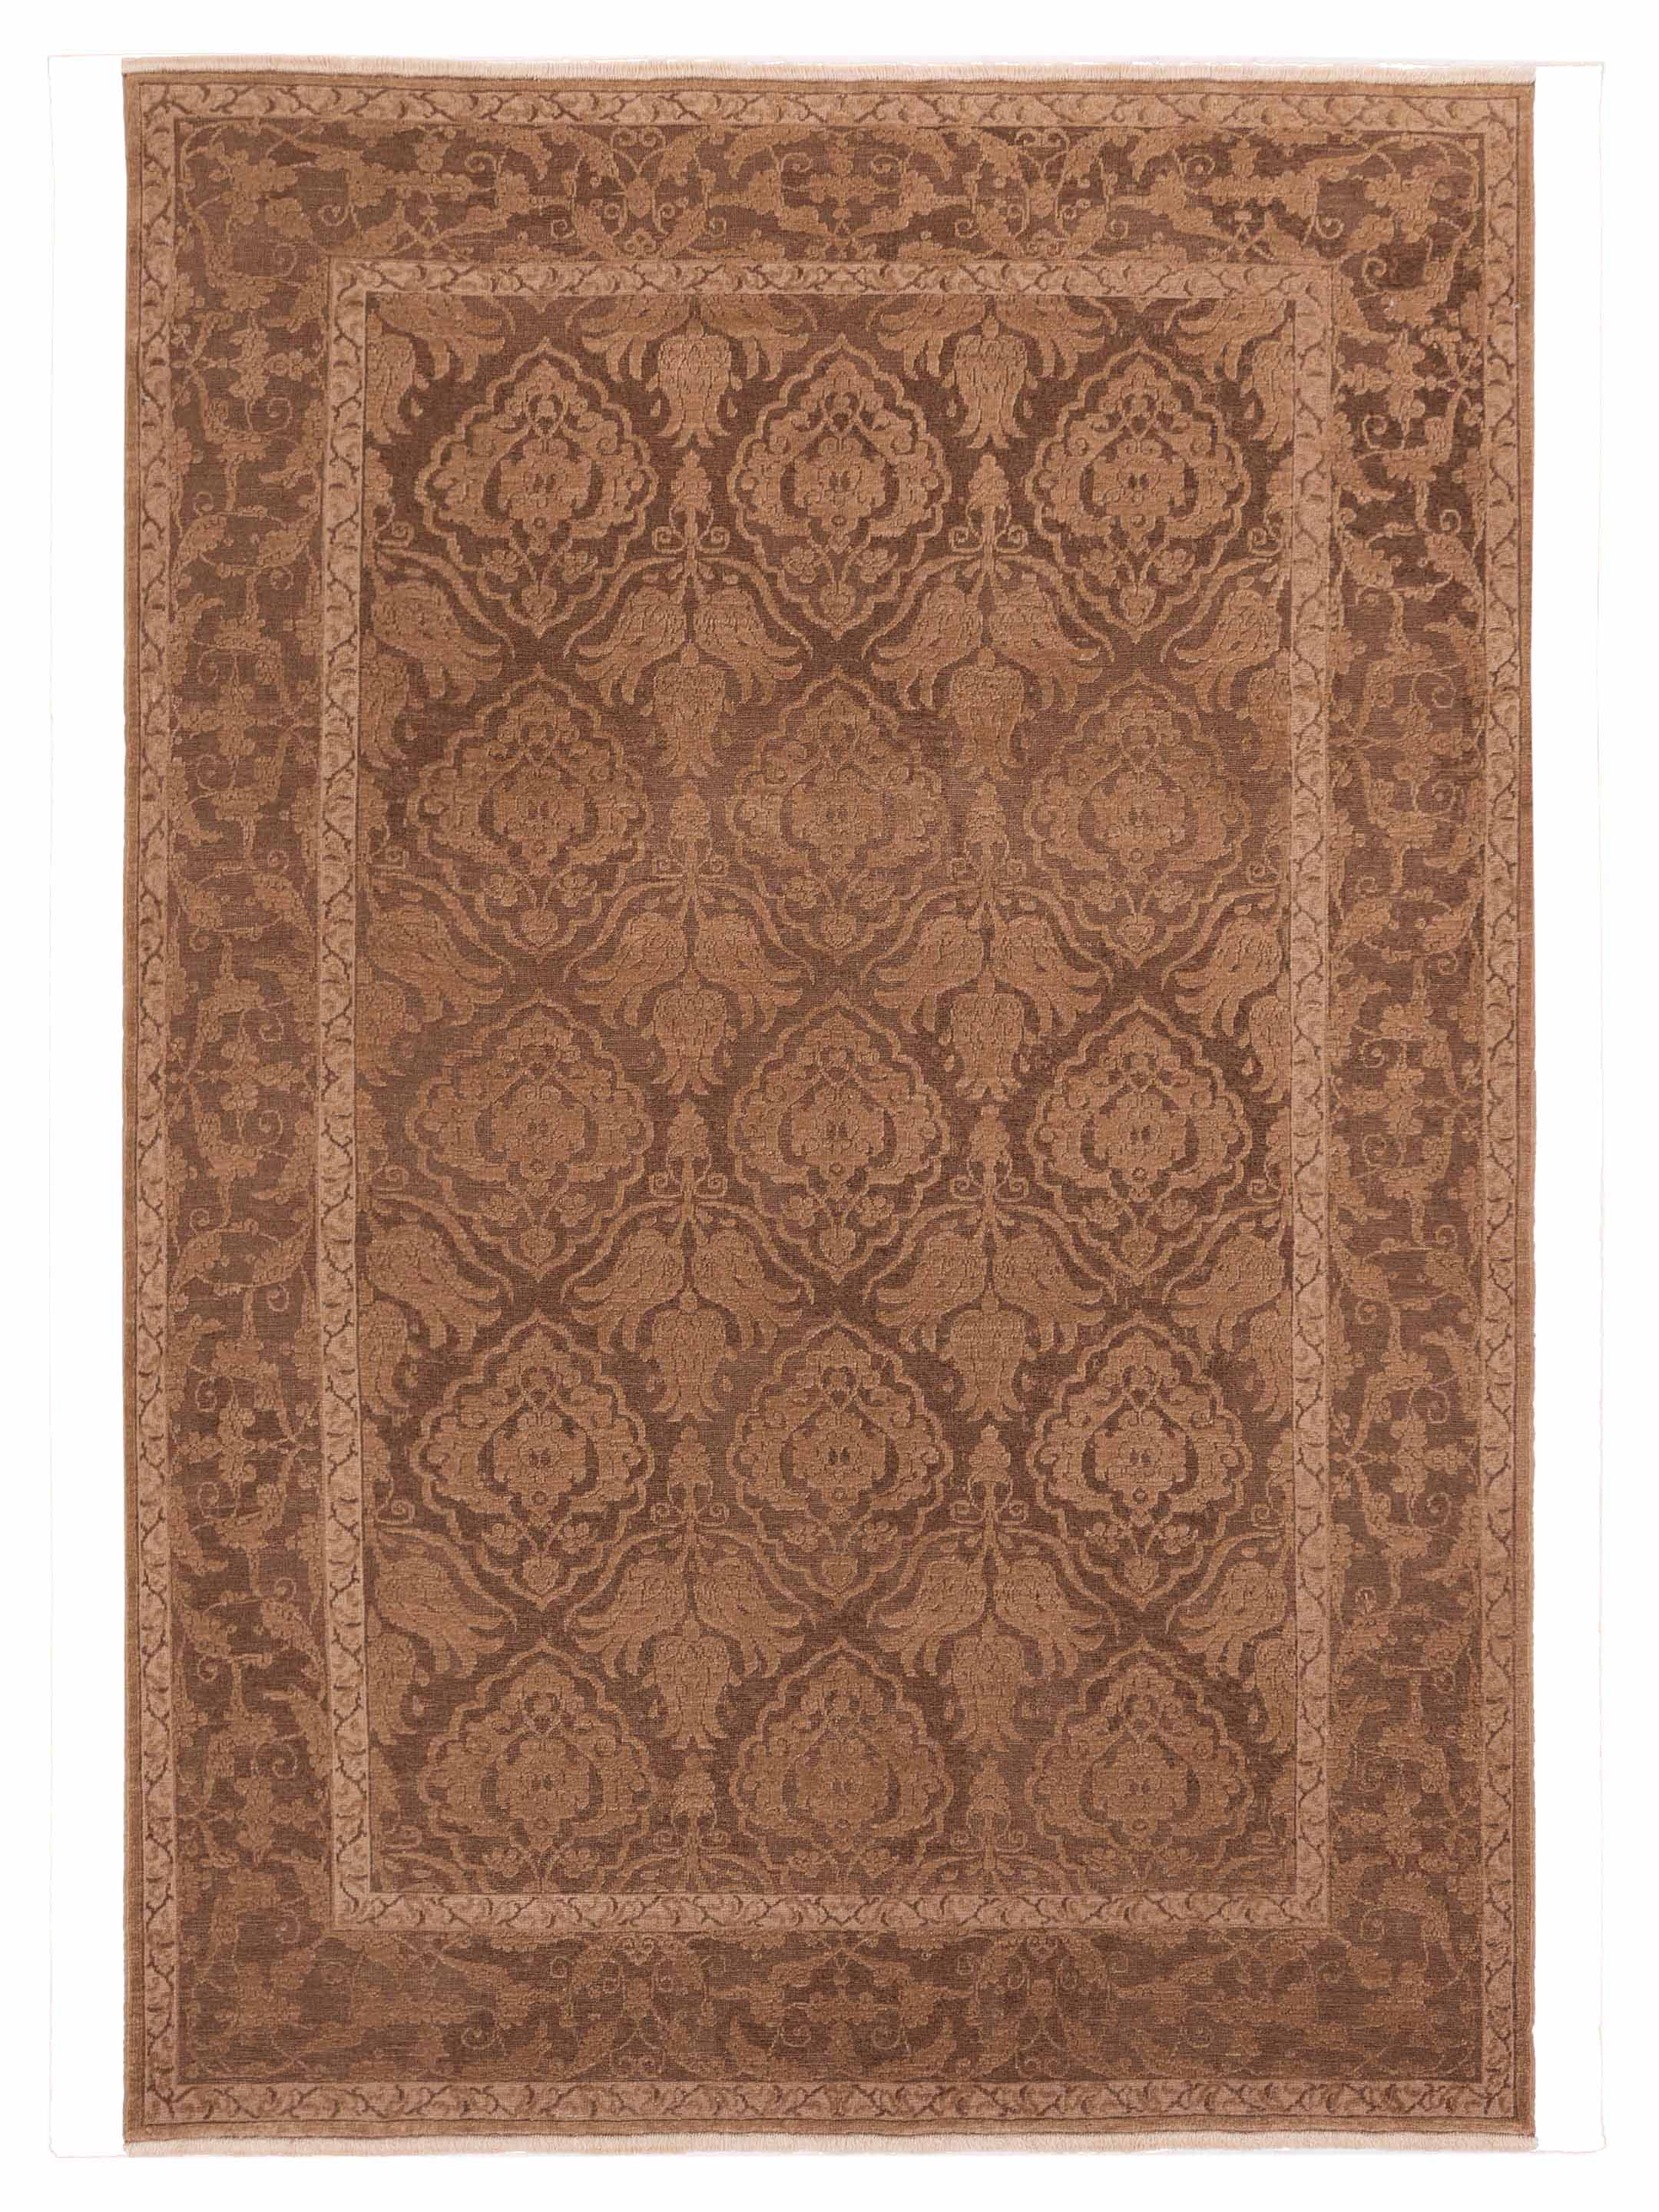 Transitional Brown 6x9 Area Rug	